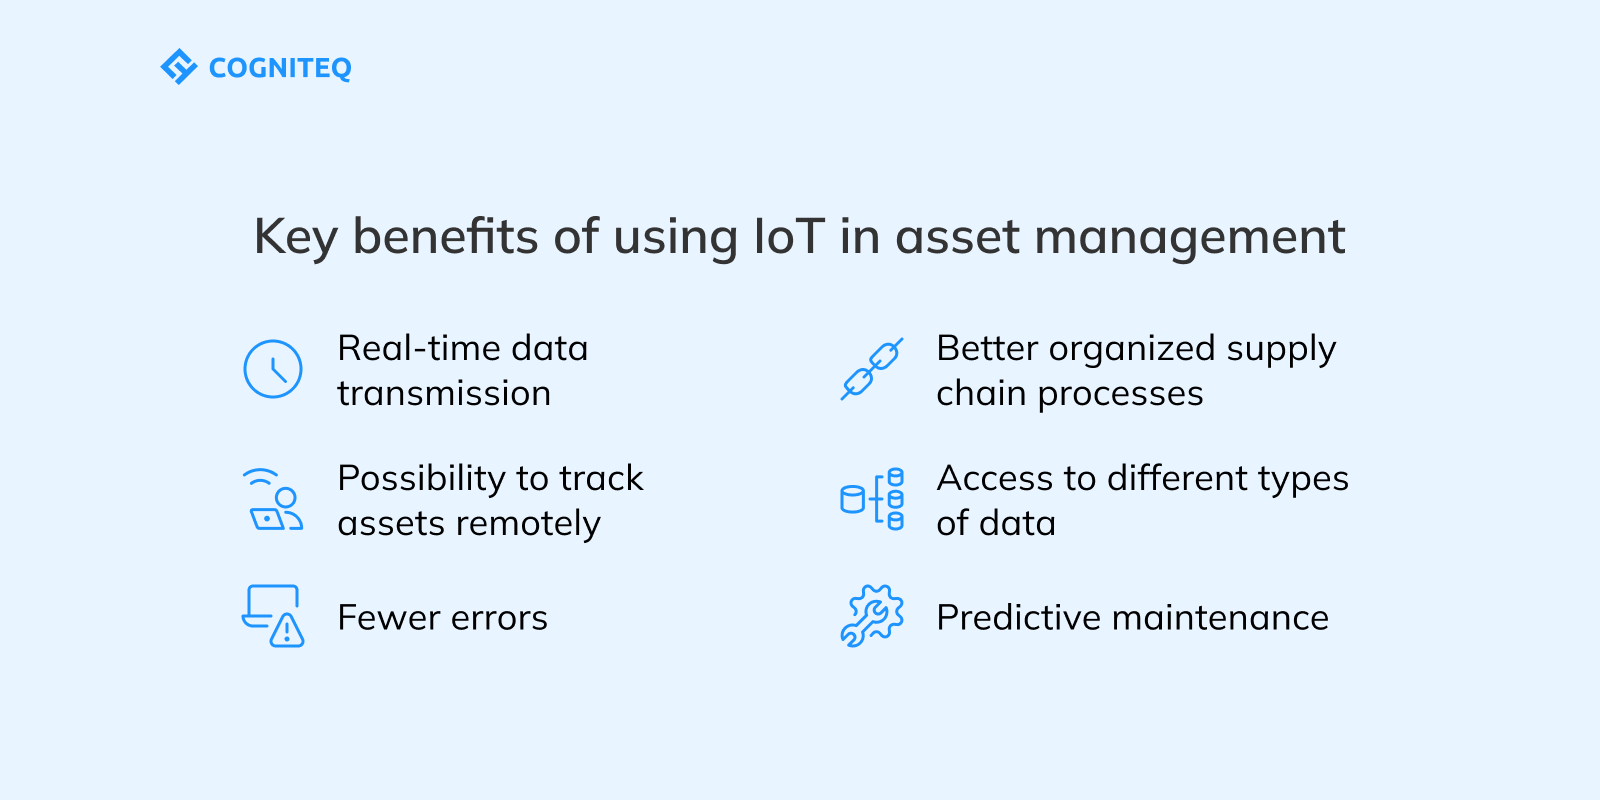 Key benefits of using IoT in asset management